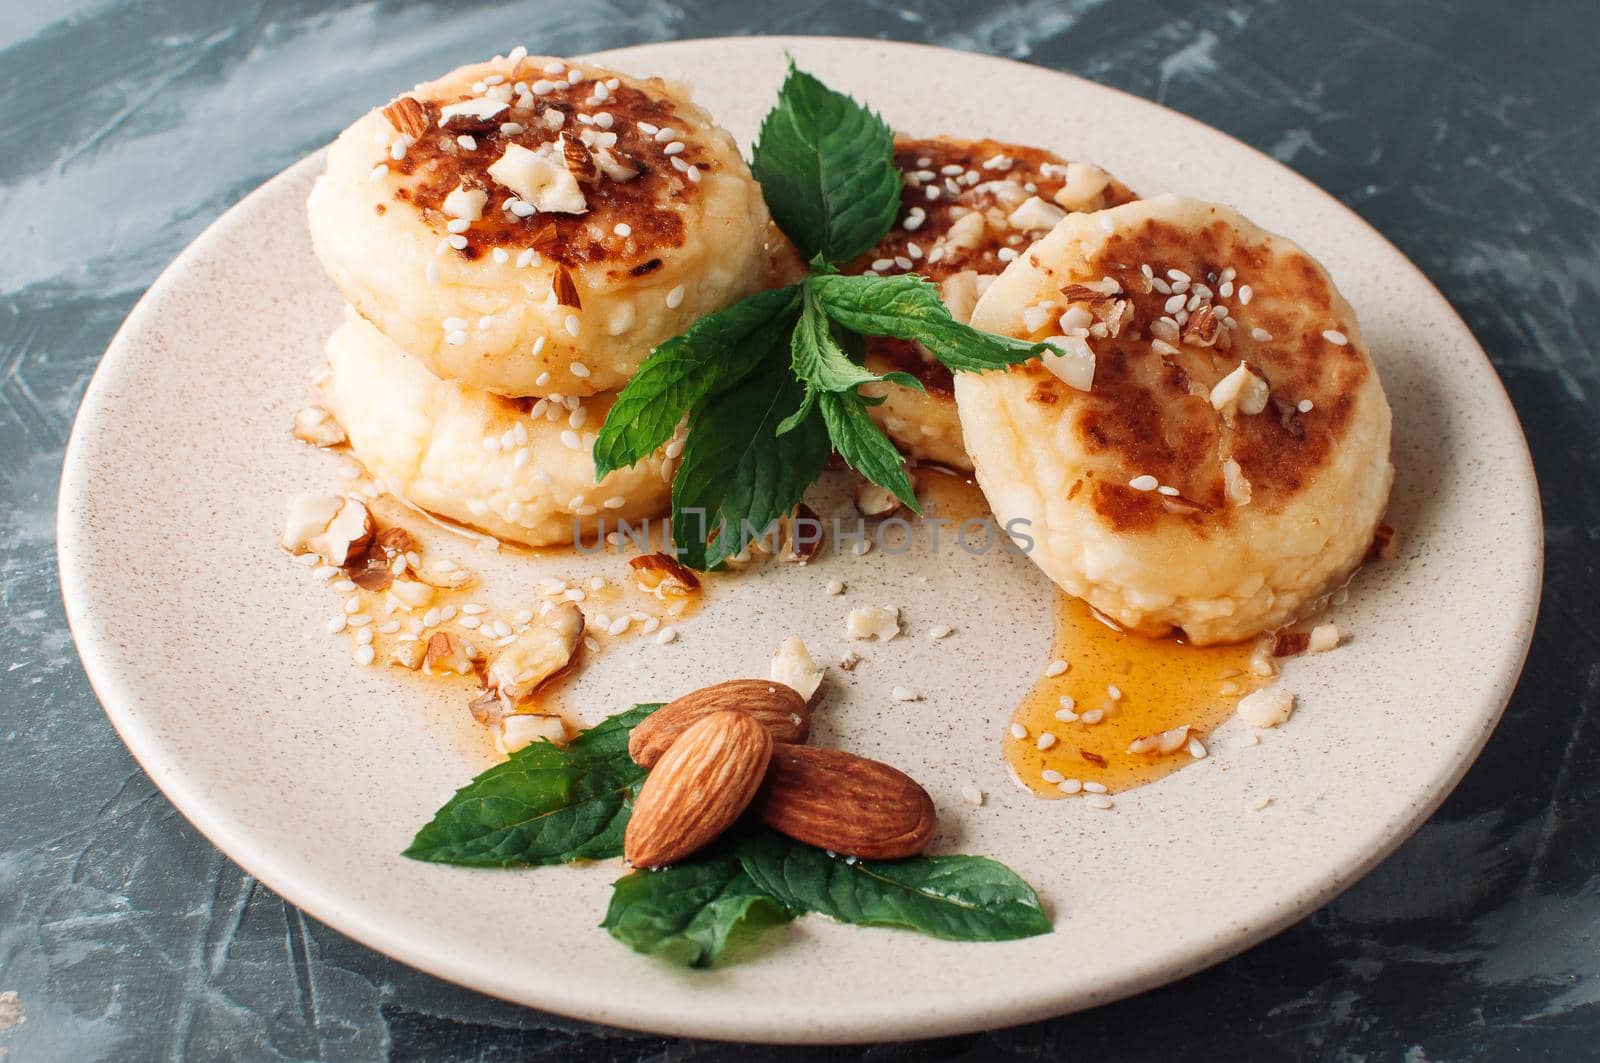 Cheesecakes,cottage cheese pancakes with almonds,fresh mint and maple syrup on a gray background from a concrete table. Cheesecakes, homemade traditional Ukrainian and Russian cheesecakes